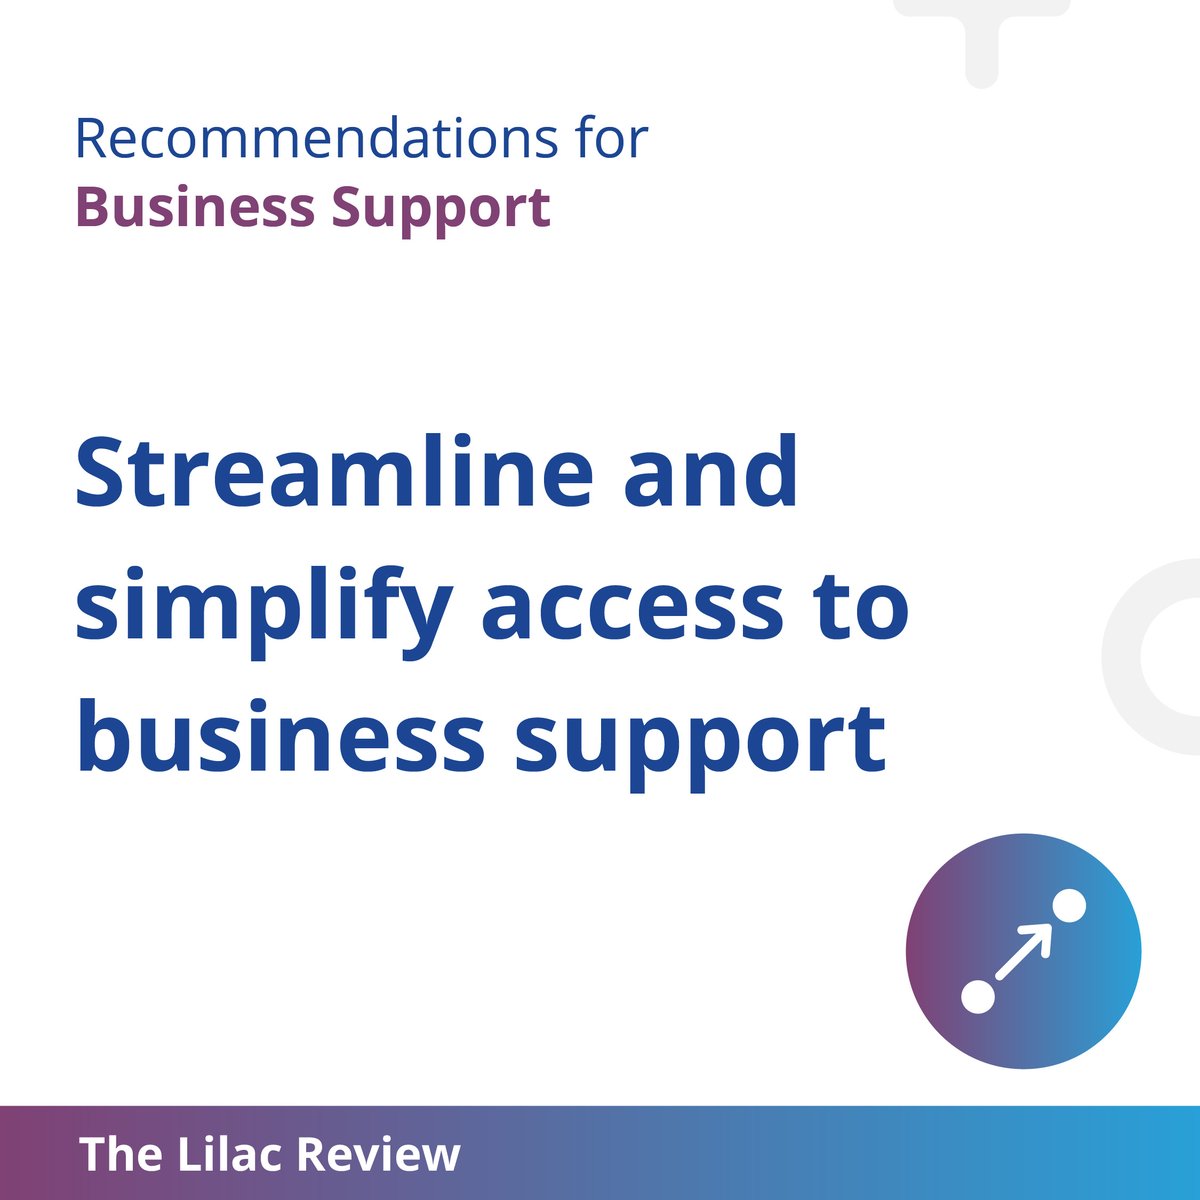 Following a wide range of focus groups with Disabled entrepreneurs, our Interim Report details the challenges they face & offers a series of recommendations for Government, financial services, & business support organisations to make entrepreneurship fundamentally more inclusive.